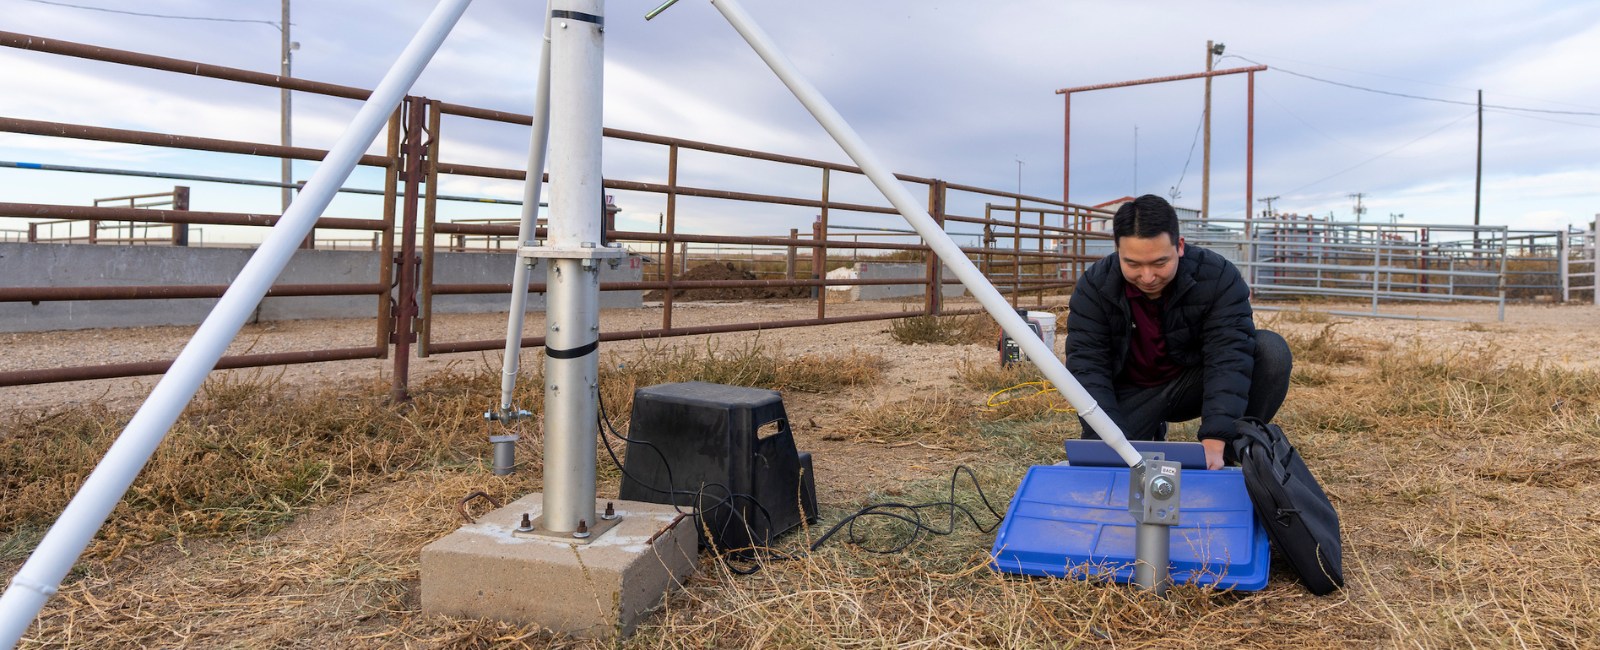 Man kneeling at a laptop computer on  hay-covered ground in a corral in front of a large tripod